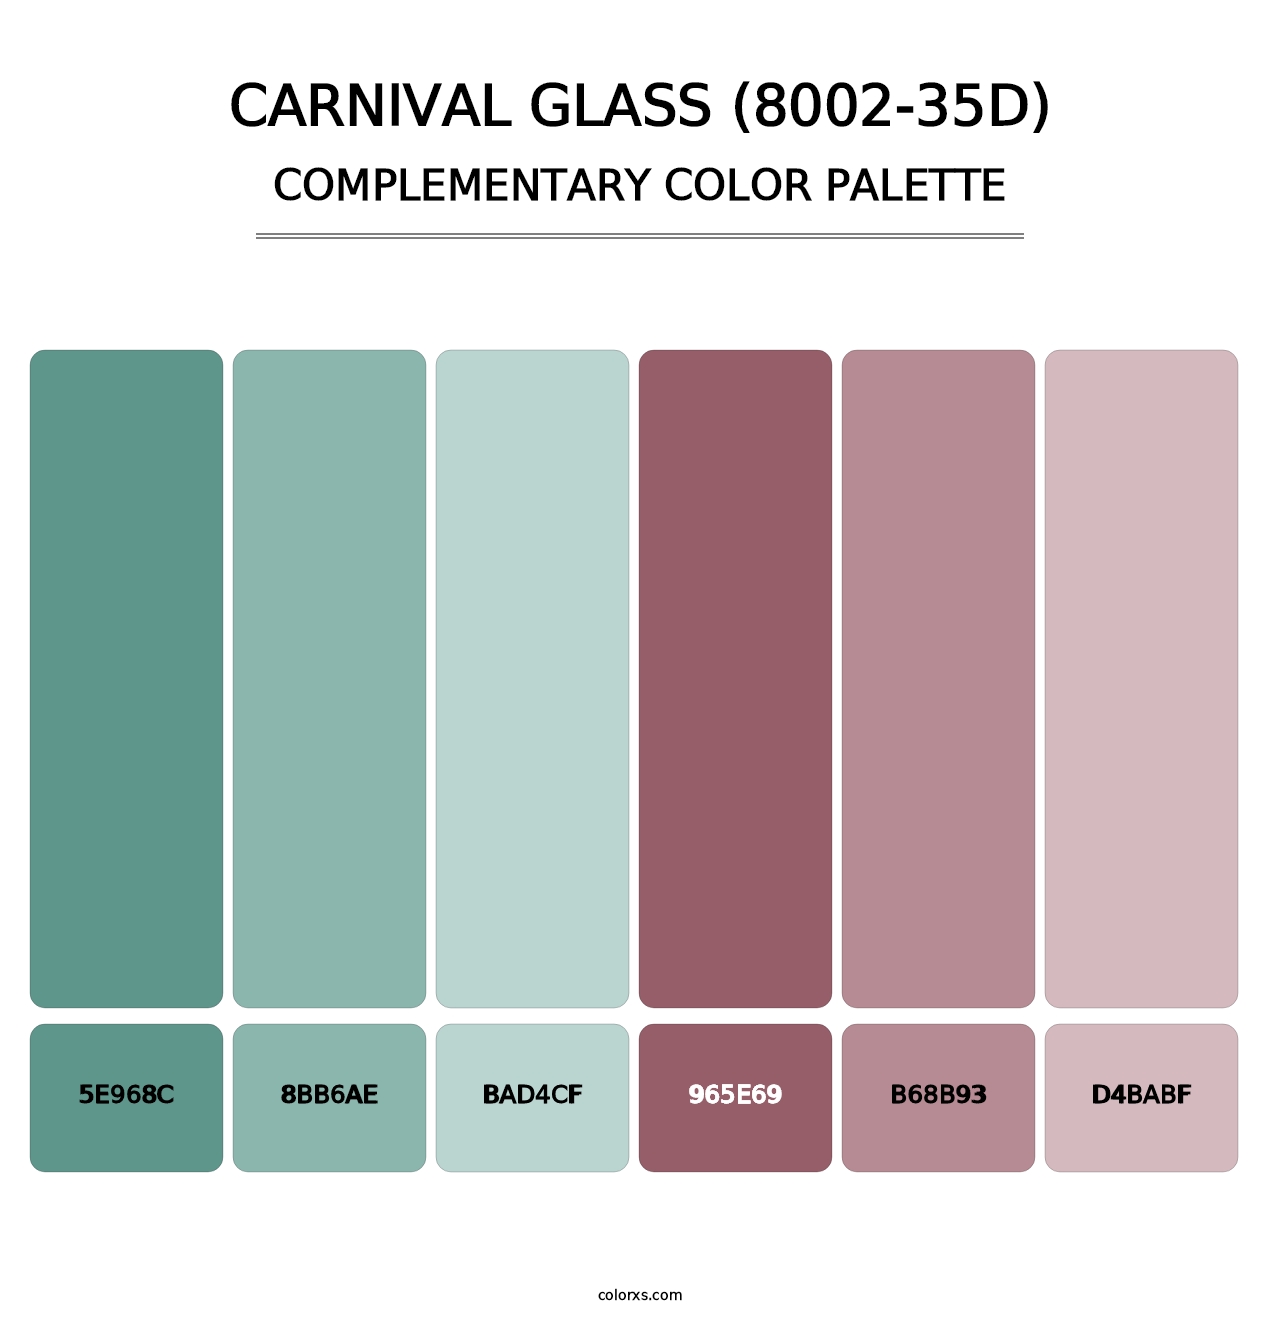 Carnival Glass (8002-35D) - Complementary Color Palette